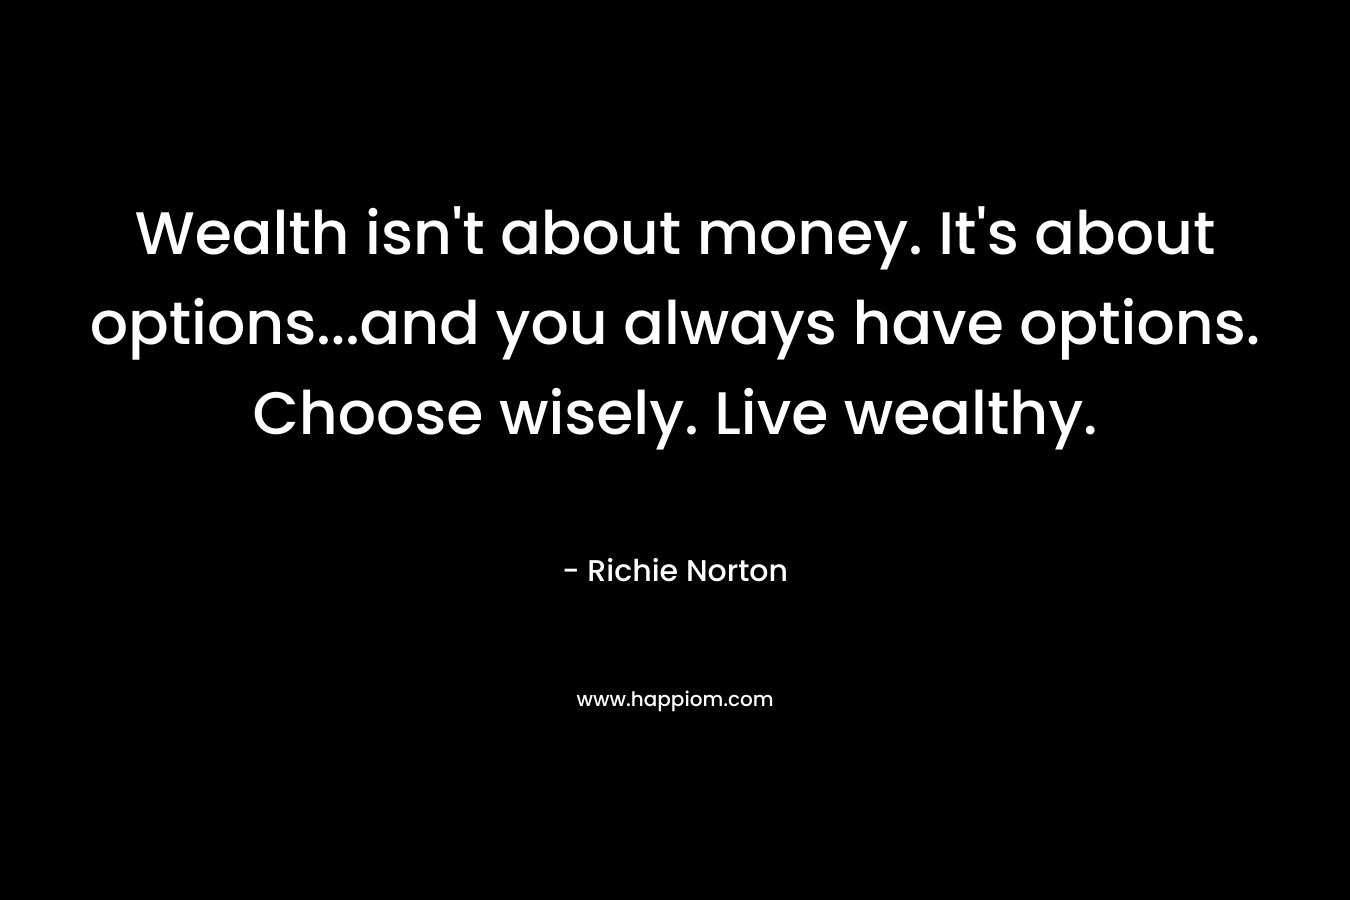 Wealth isn't about money. It's about options...and you always have options. Choose wisely. Live wealthy.